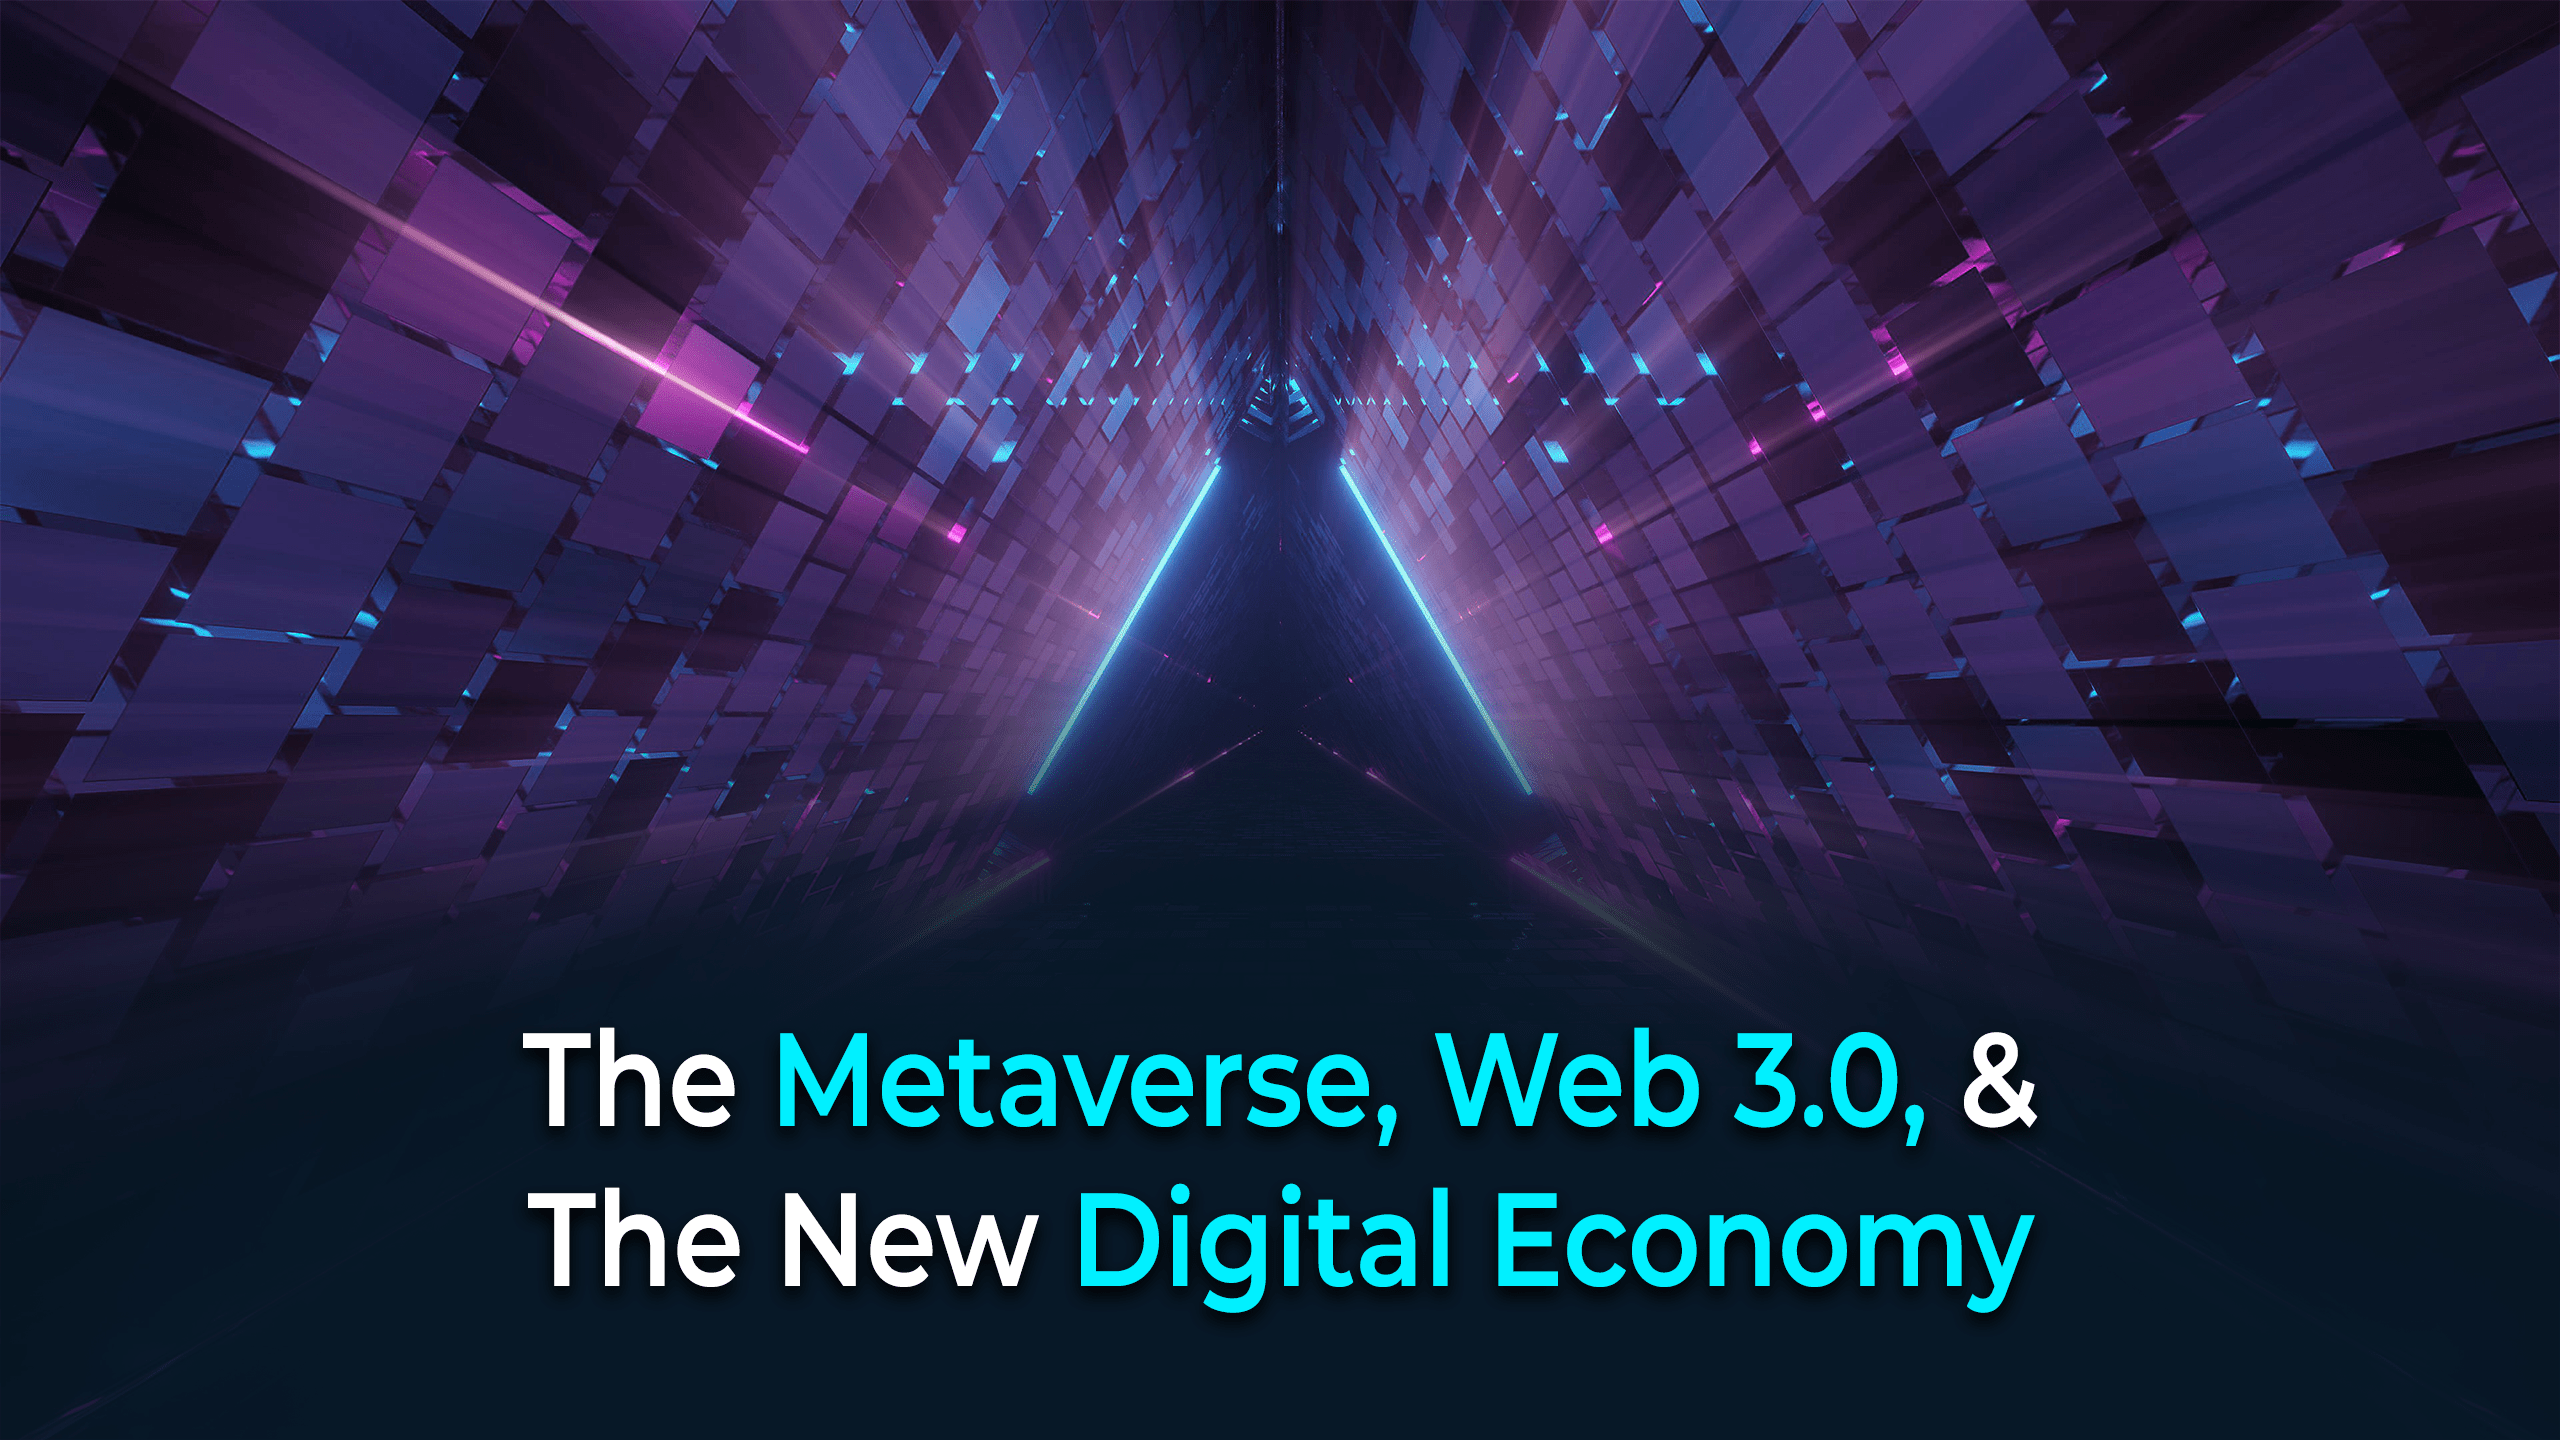 Web 3.0, the Metaverse, and the New Digital Economy Web 3.0 India